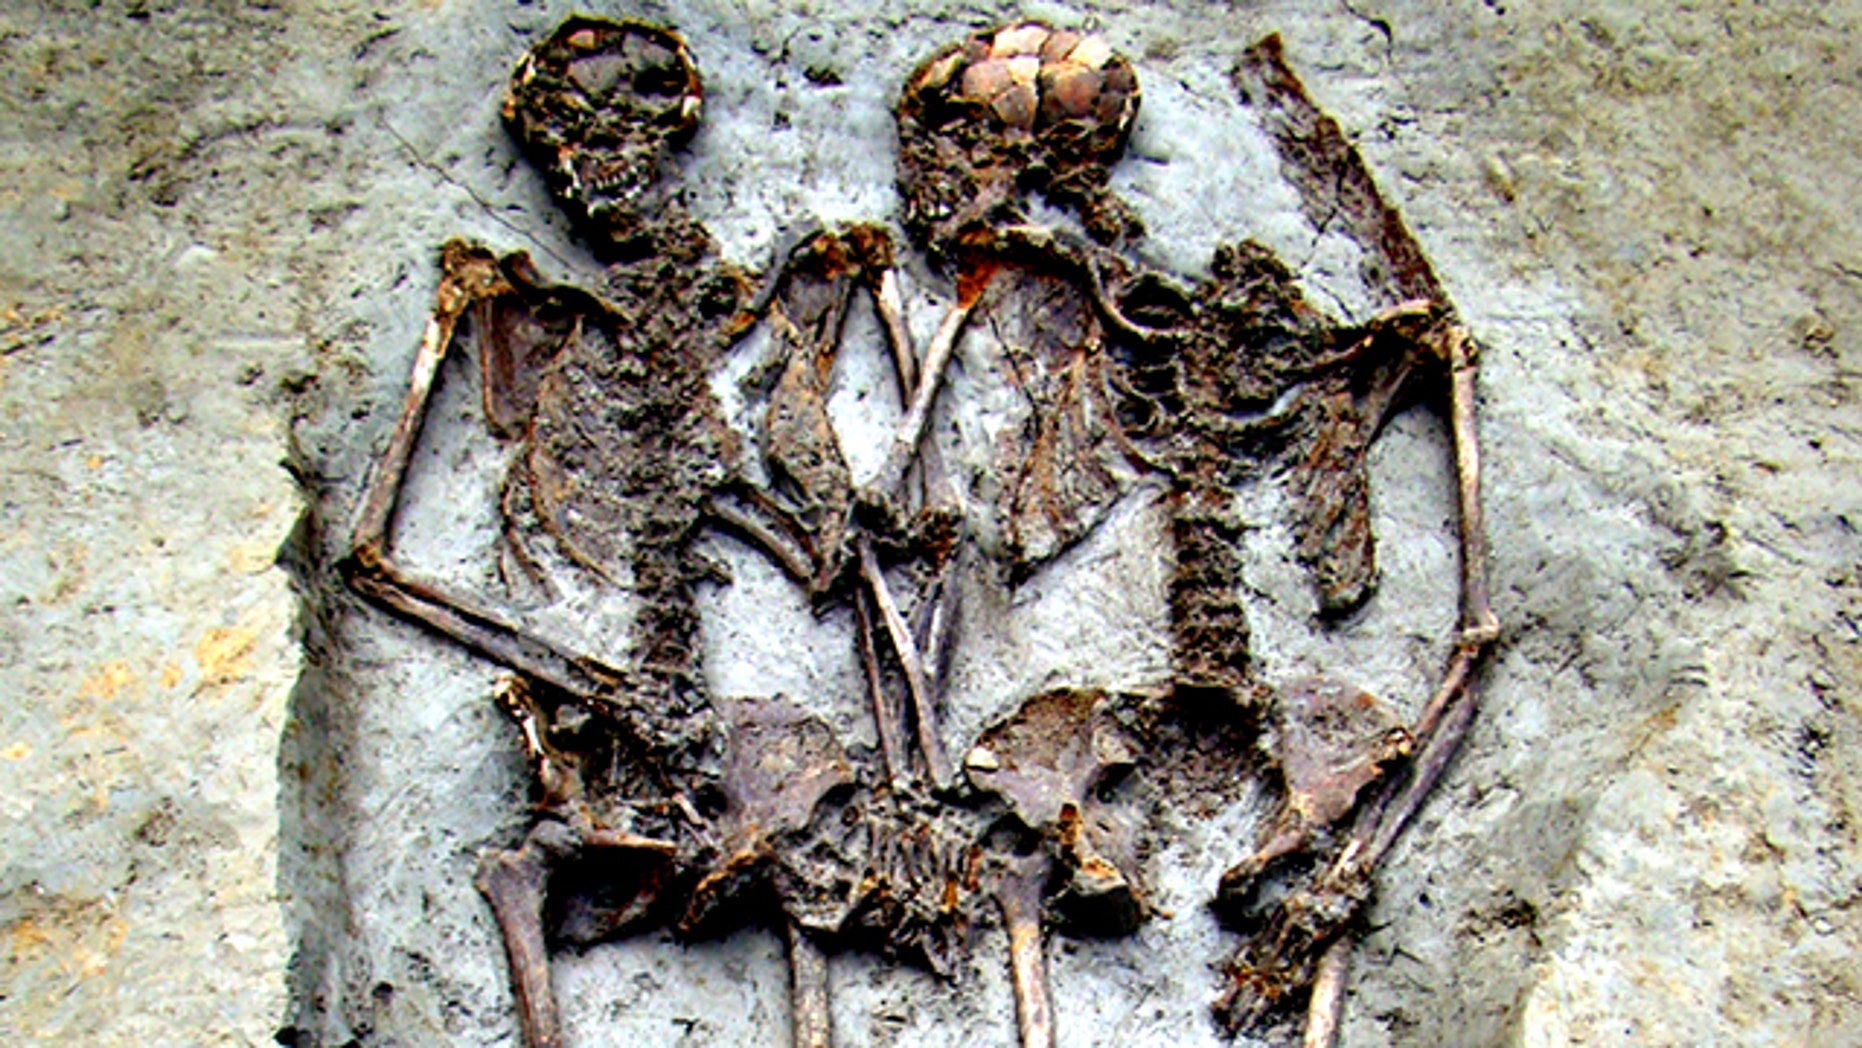 skeletons found holding hands thousands of years later